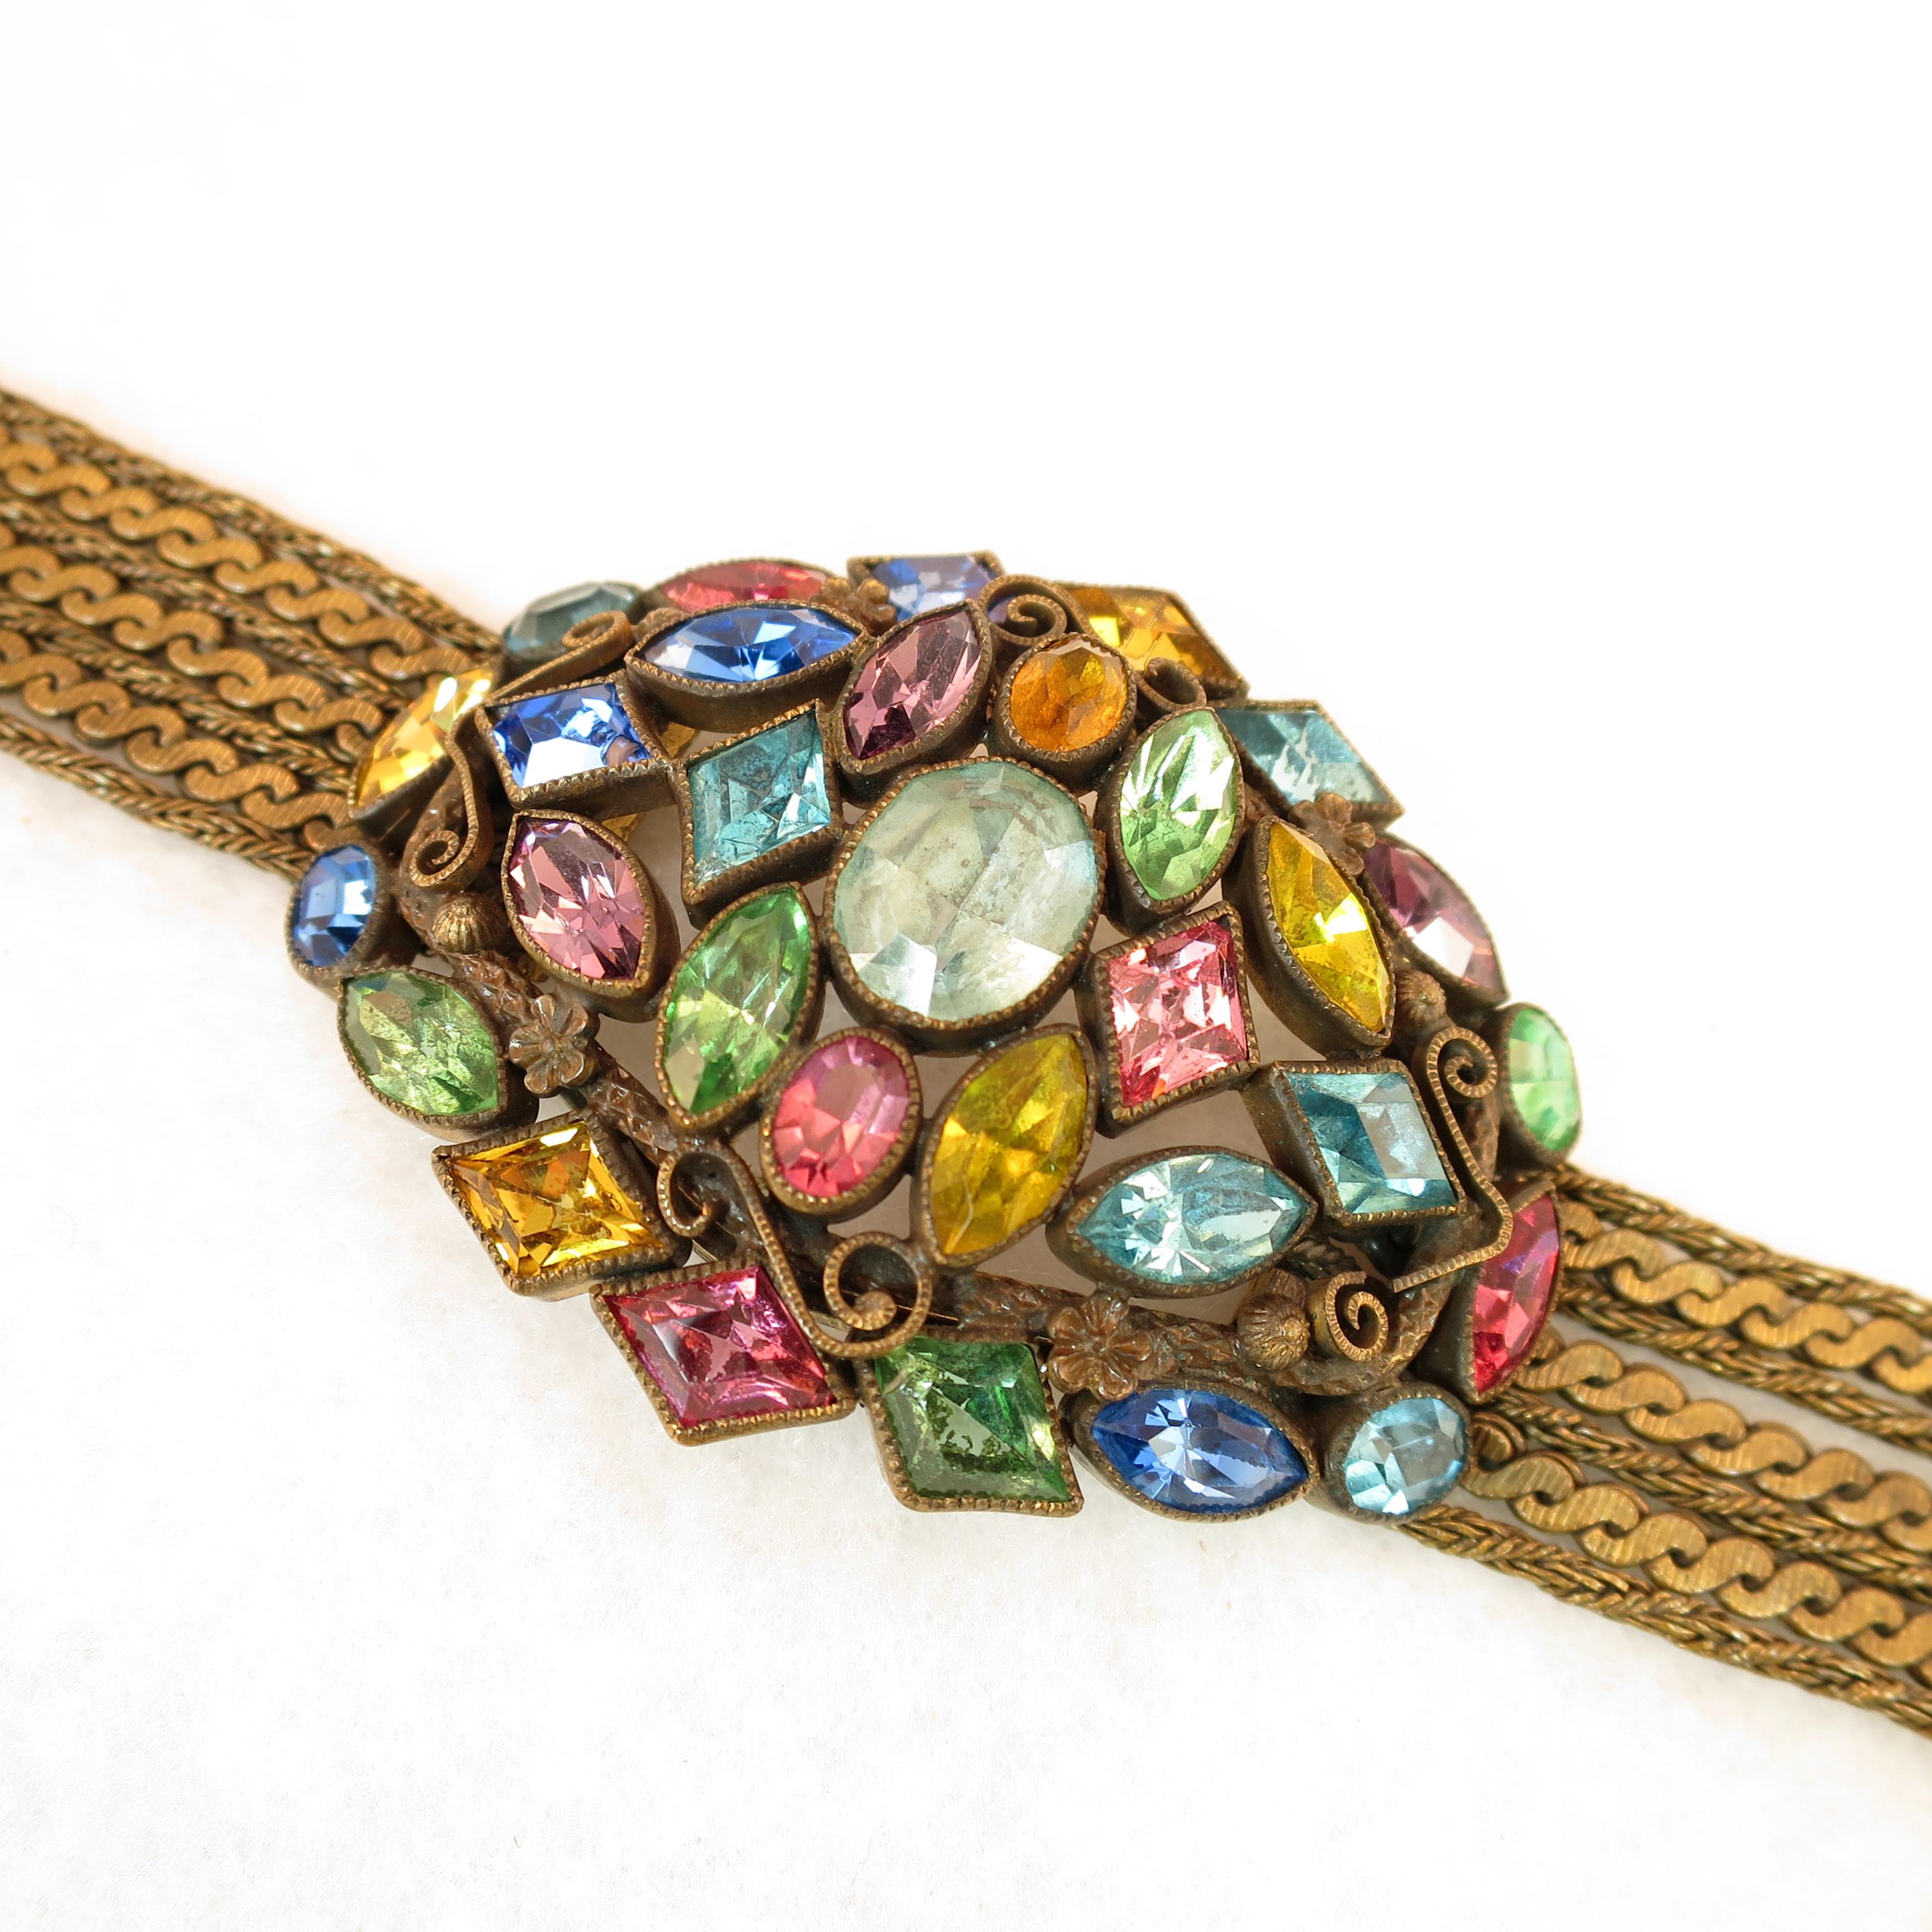 Offered here is a Czech Art Deco gold-washed bracelet with jewel-tone Bohemian crystals and chains from the 1920s. The massive centerpiece in a domed stacked open-work design is embellished with tiny rosettes and curls, and presents